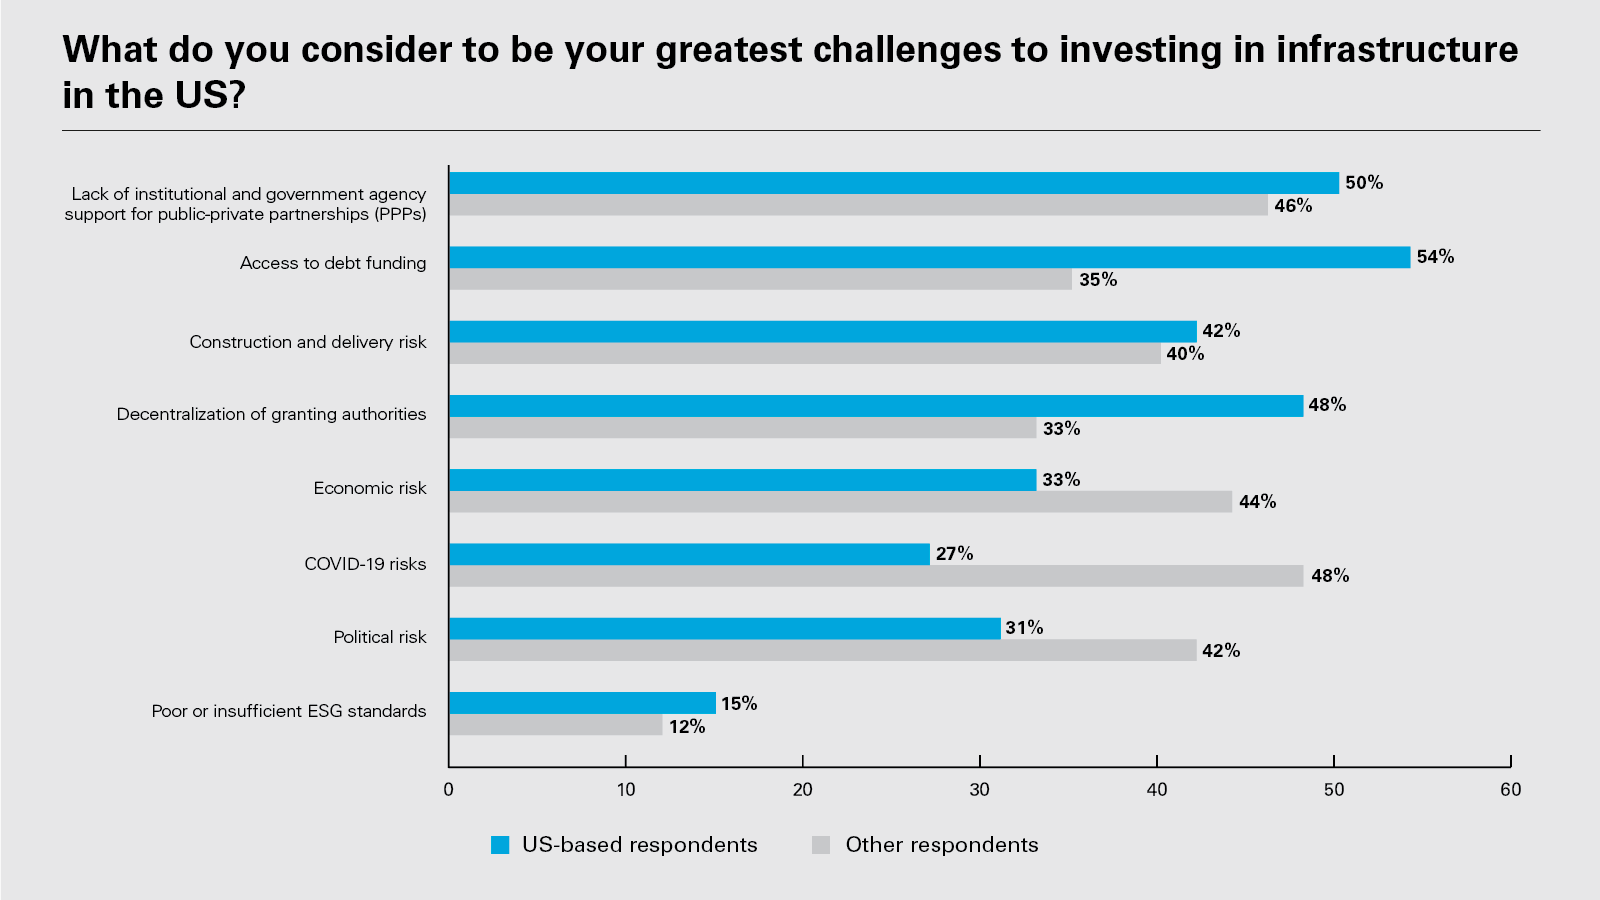 What do you consider to be your greatest challenges to investing in infrastructure in the US?